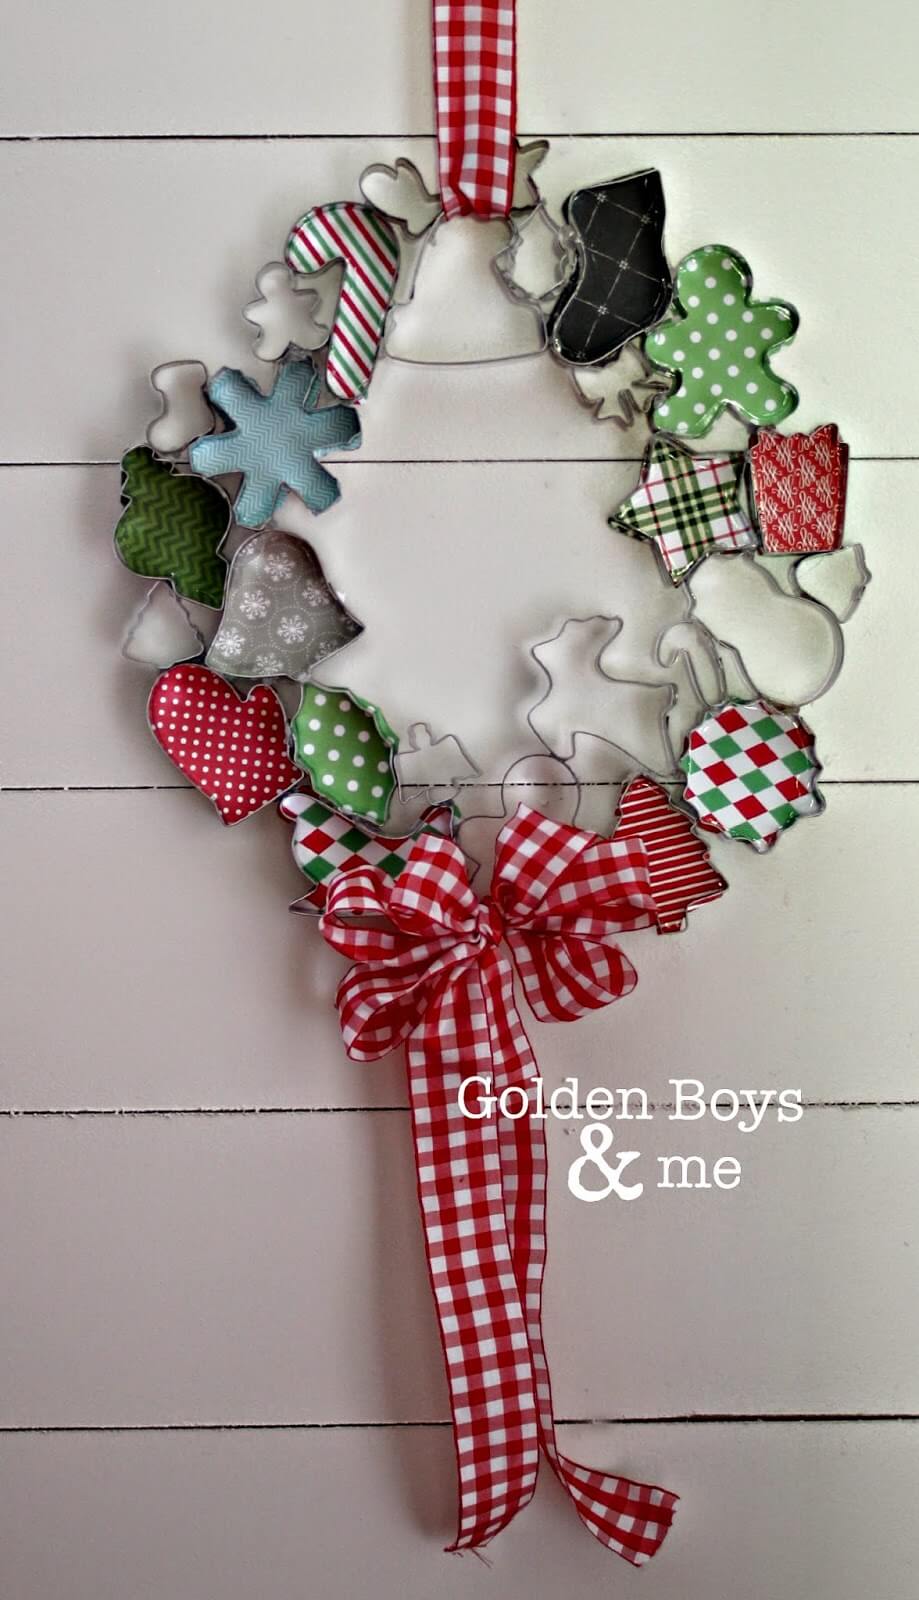 Cookie Cutter Christmas Accent for Festive Bakers